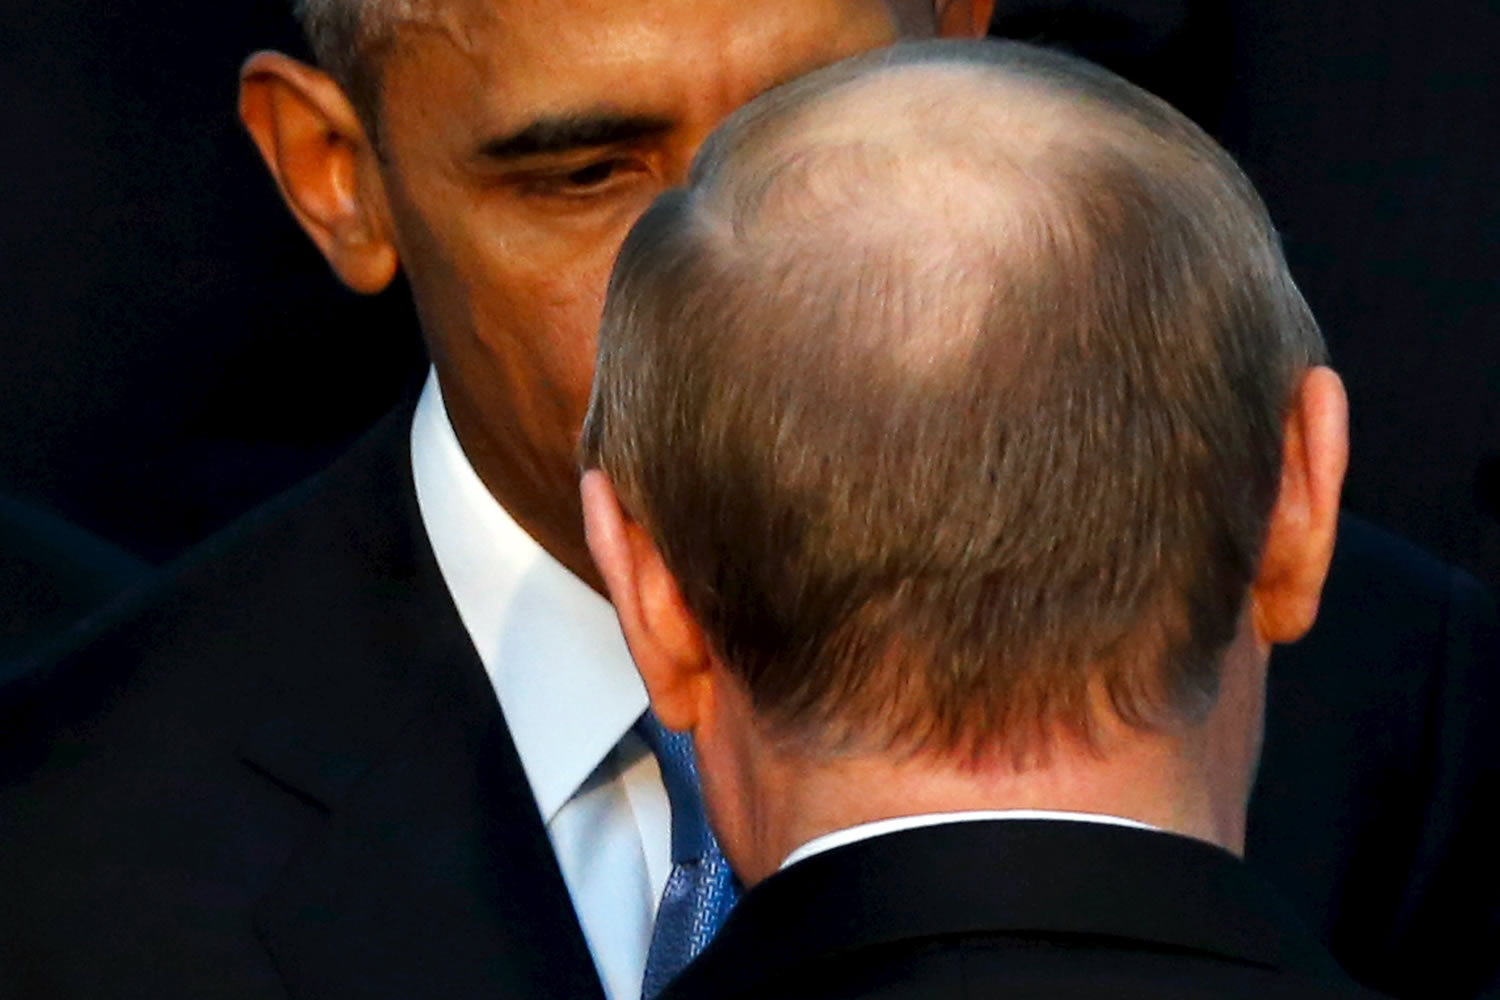 Putin and Obama see each other at G20 summit